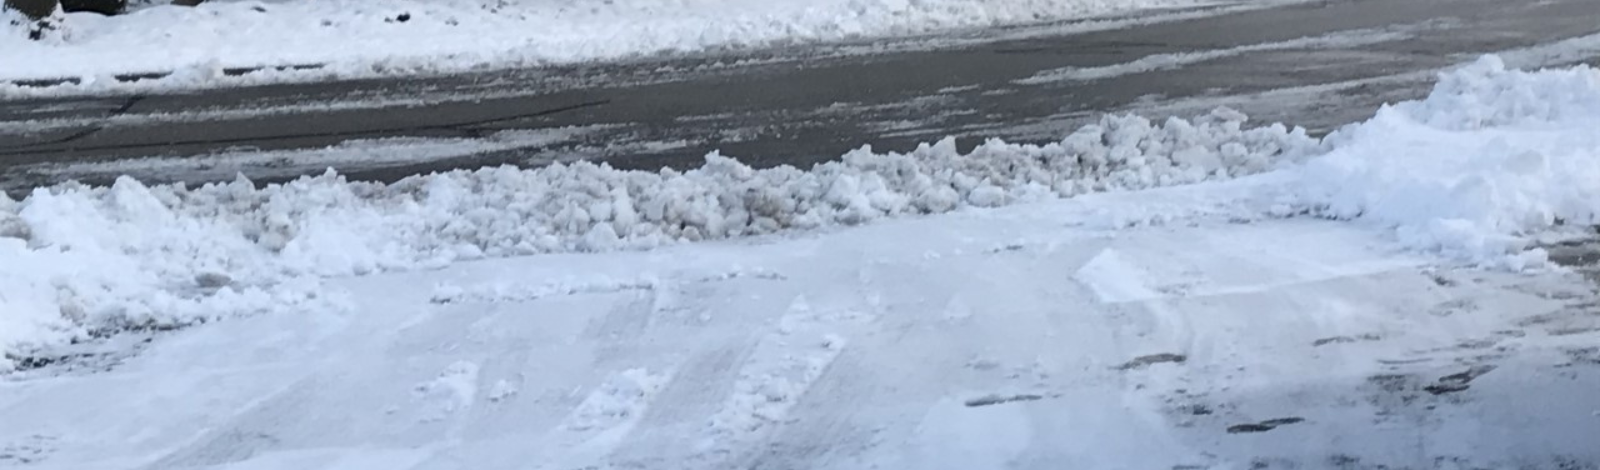 Image of windrow on driveway